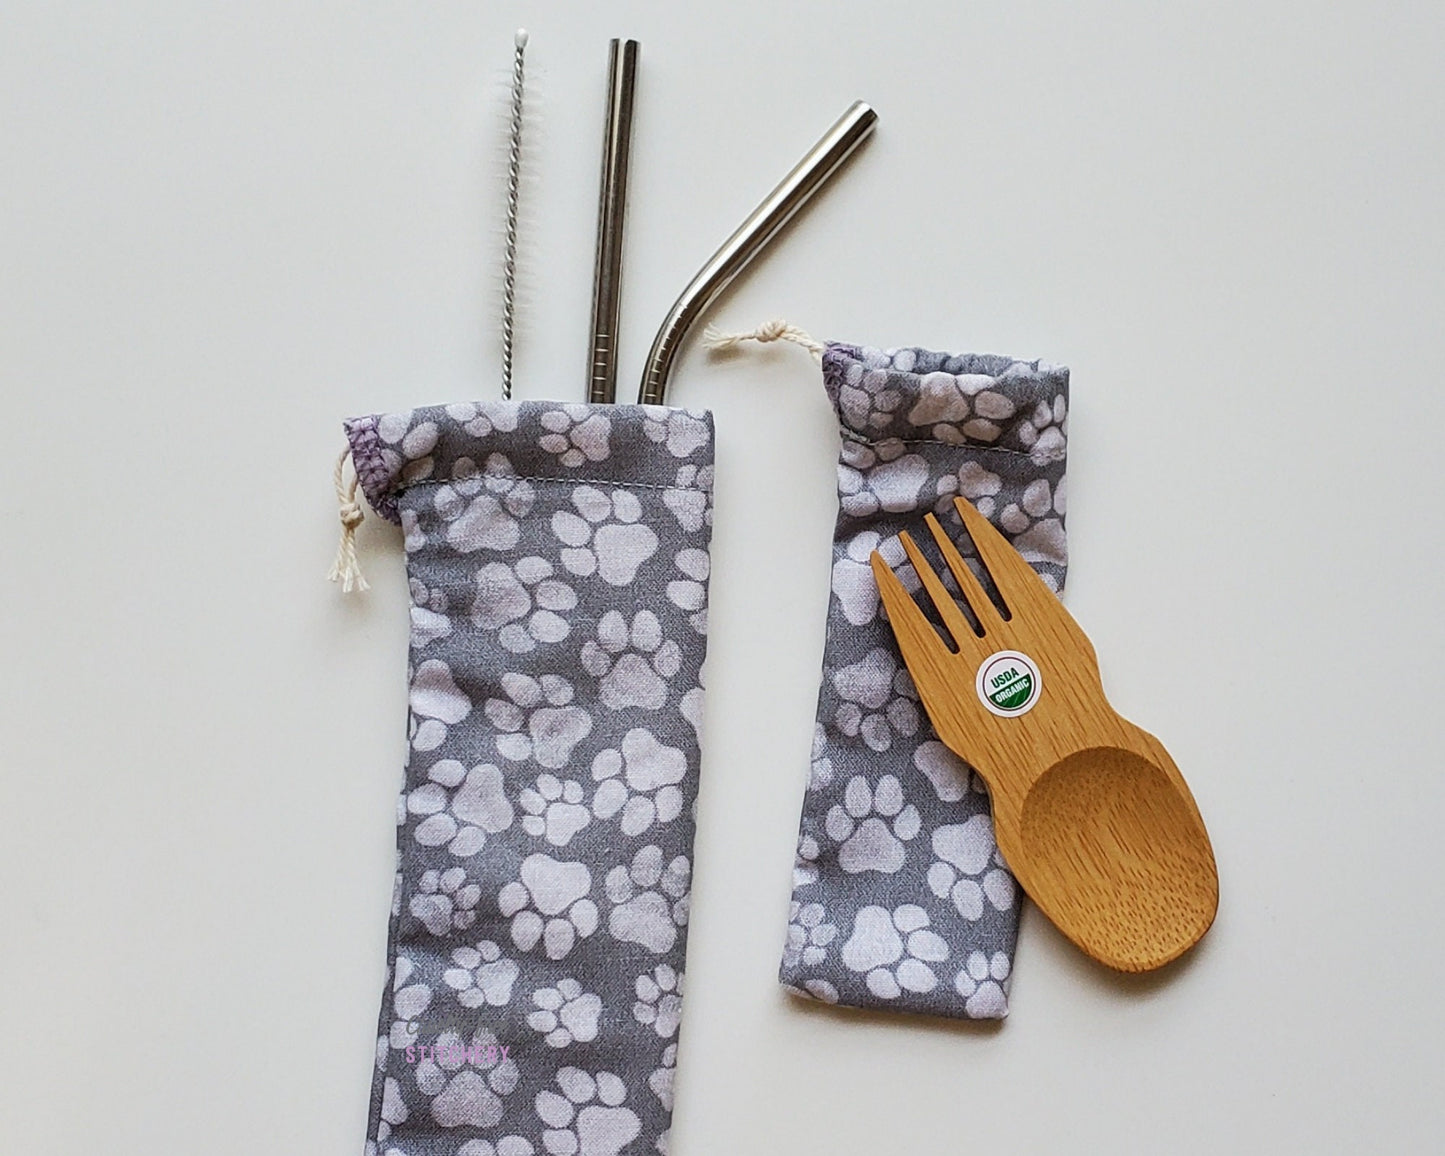 Reusable bamboo spork and stainless steel straw pouch set. The pouches are both grey with lighter grey paw prints scattered in various sizes.